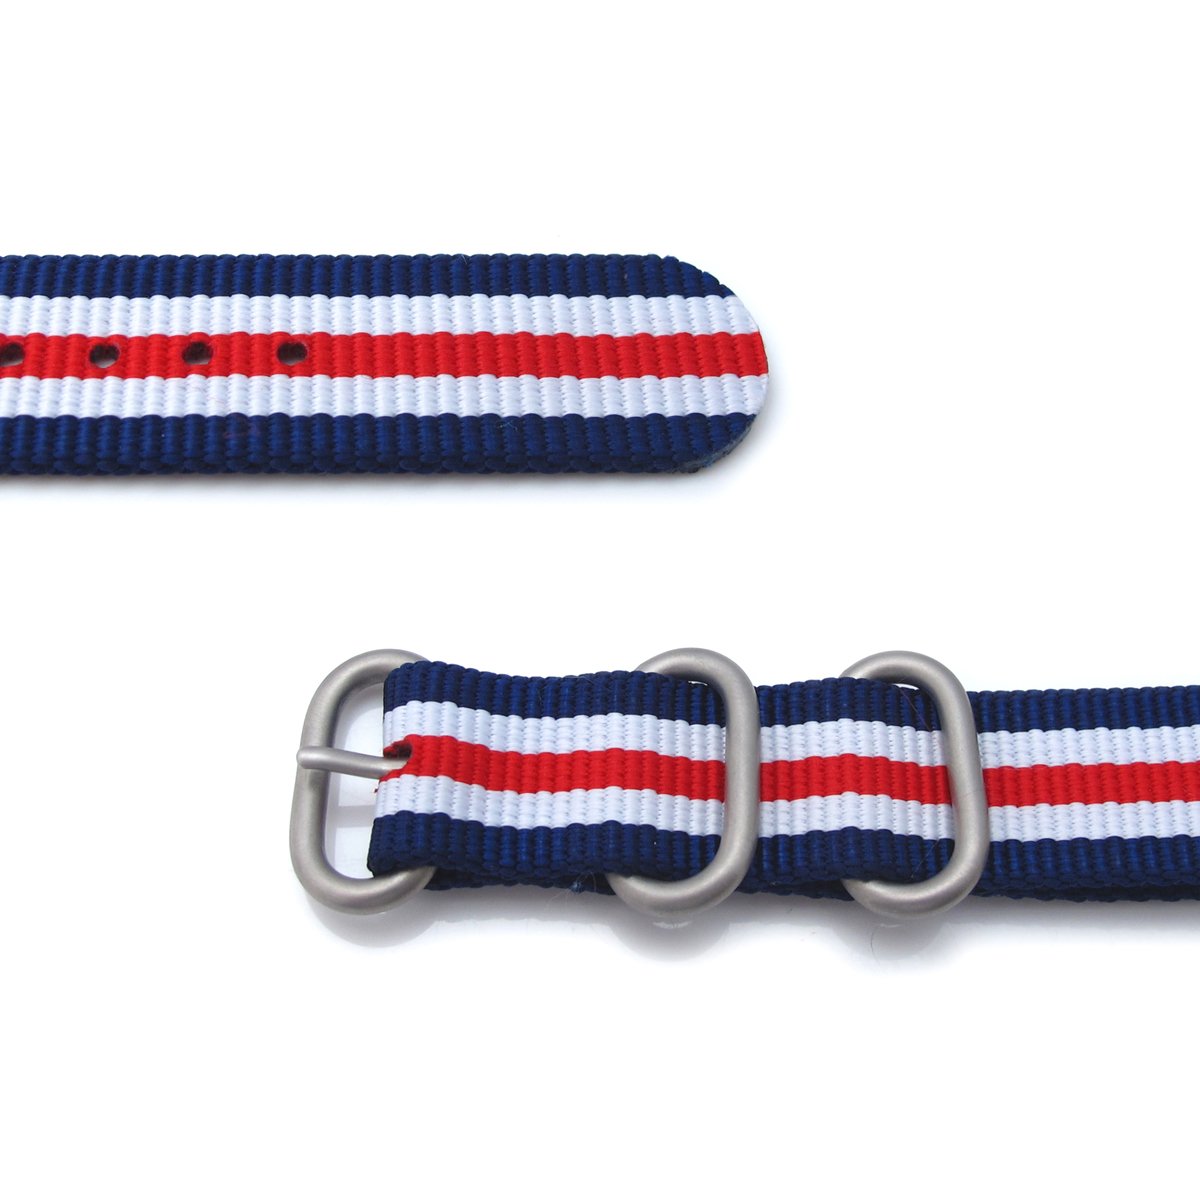 MiLTAT 20mm Zulu military watch strap ballistic nylon armband Brushed Blue White Red Strapcode Watch Bands